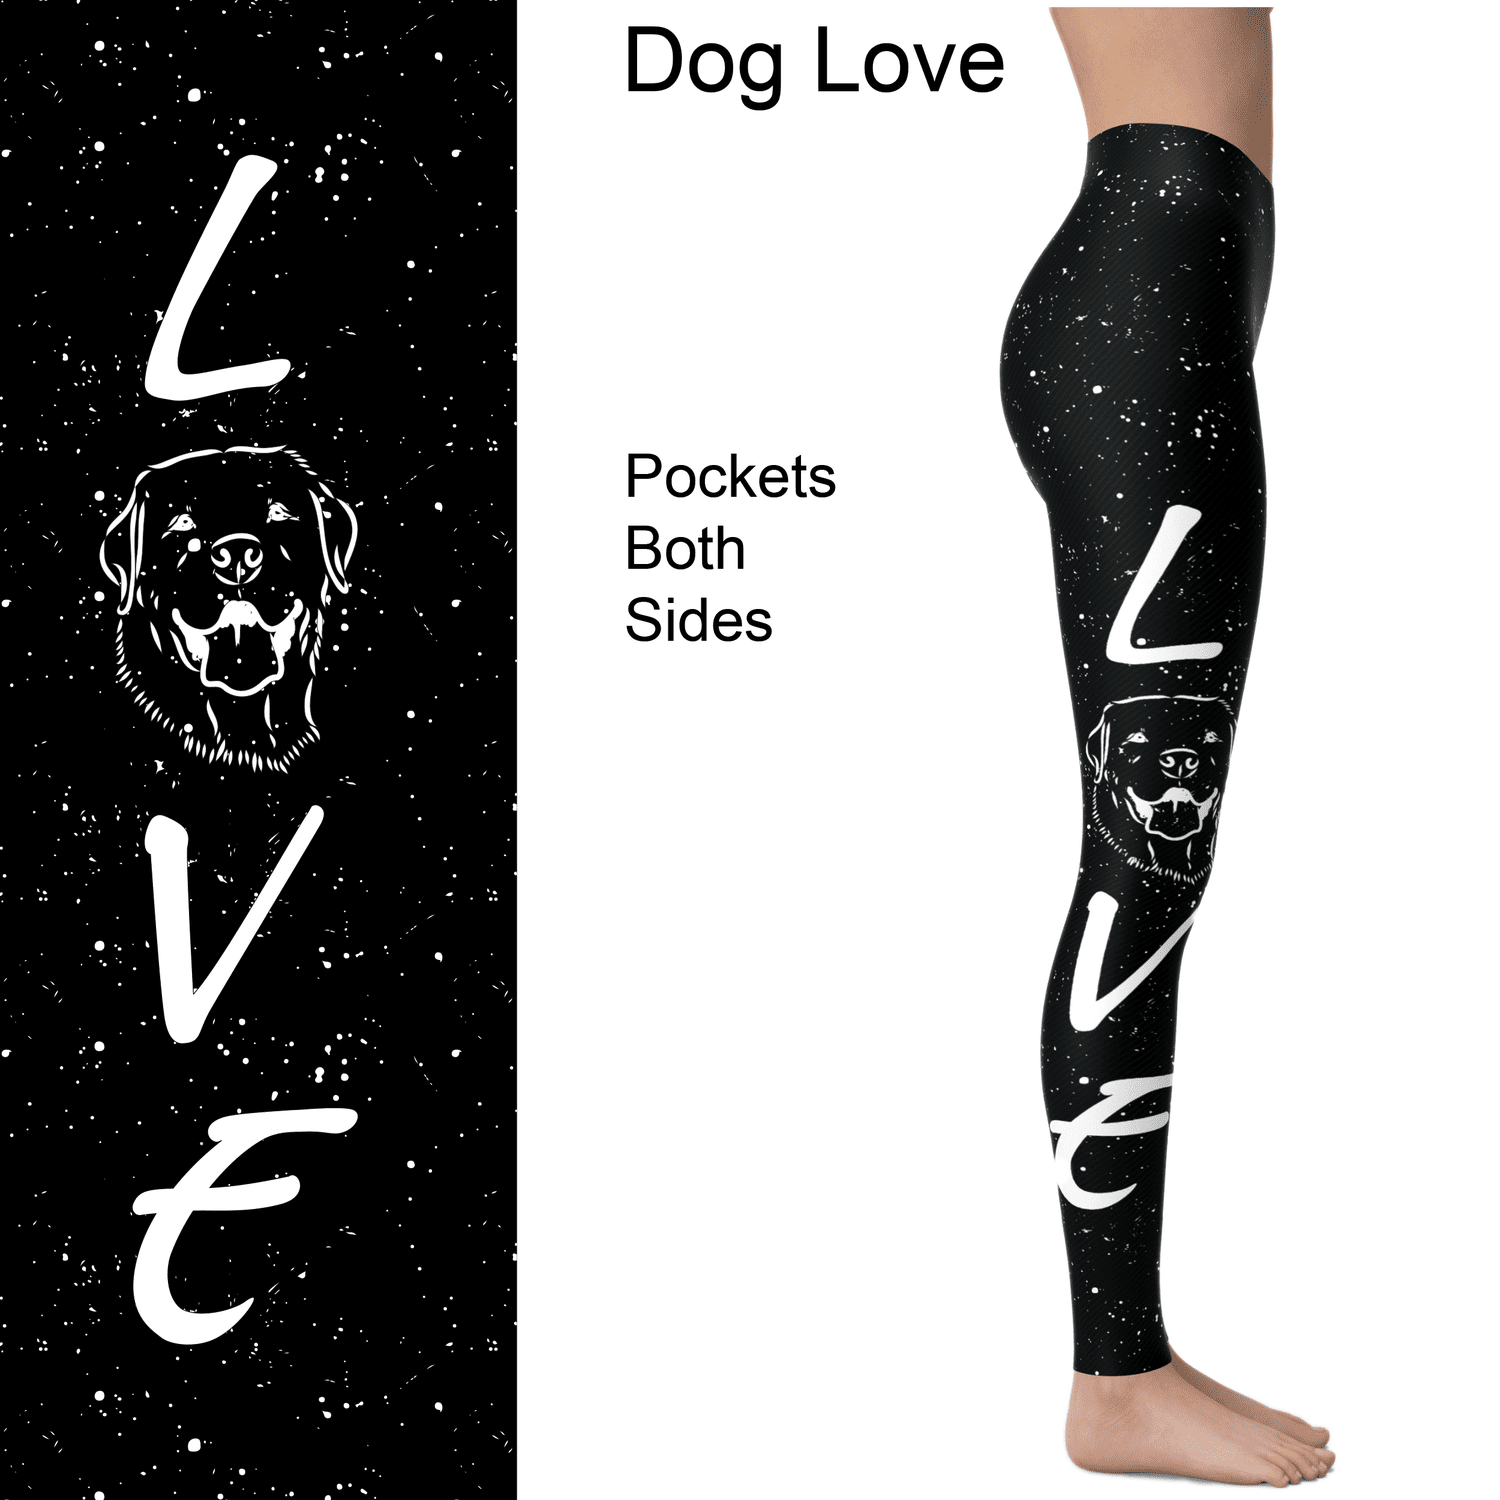 Dog Love Black and White and Pockets